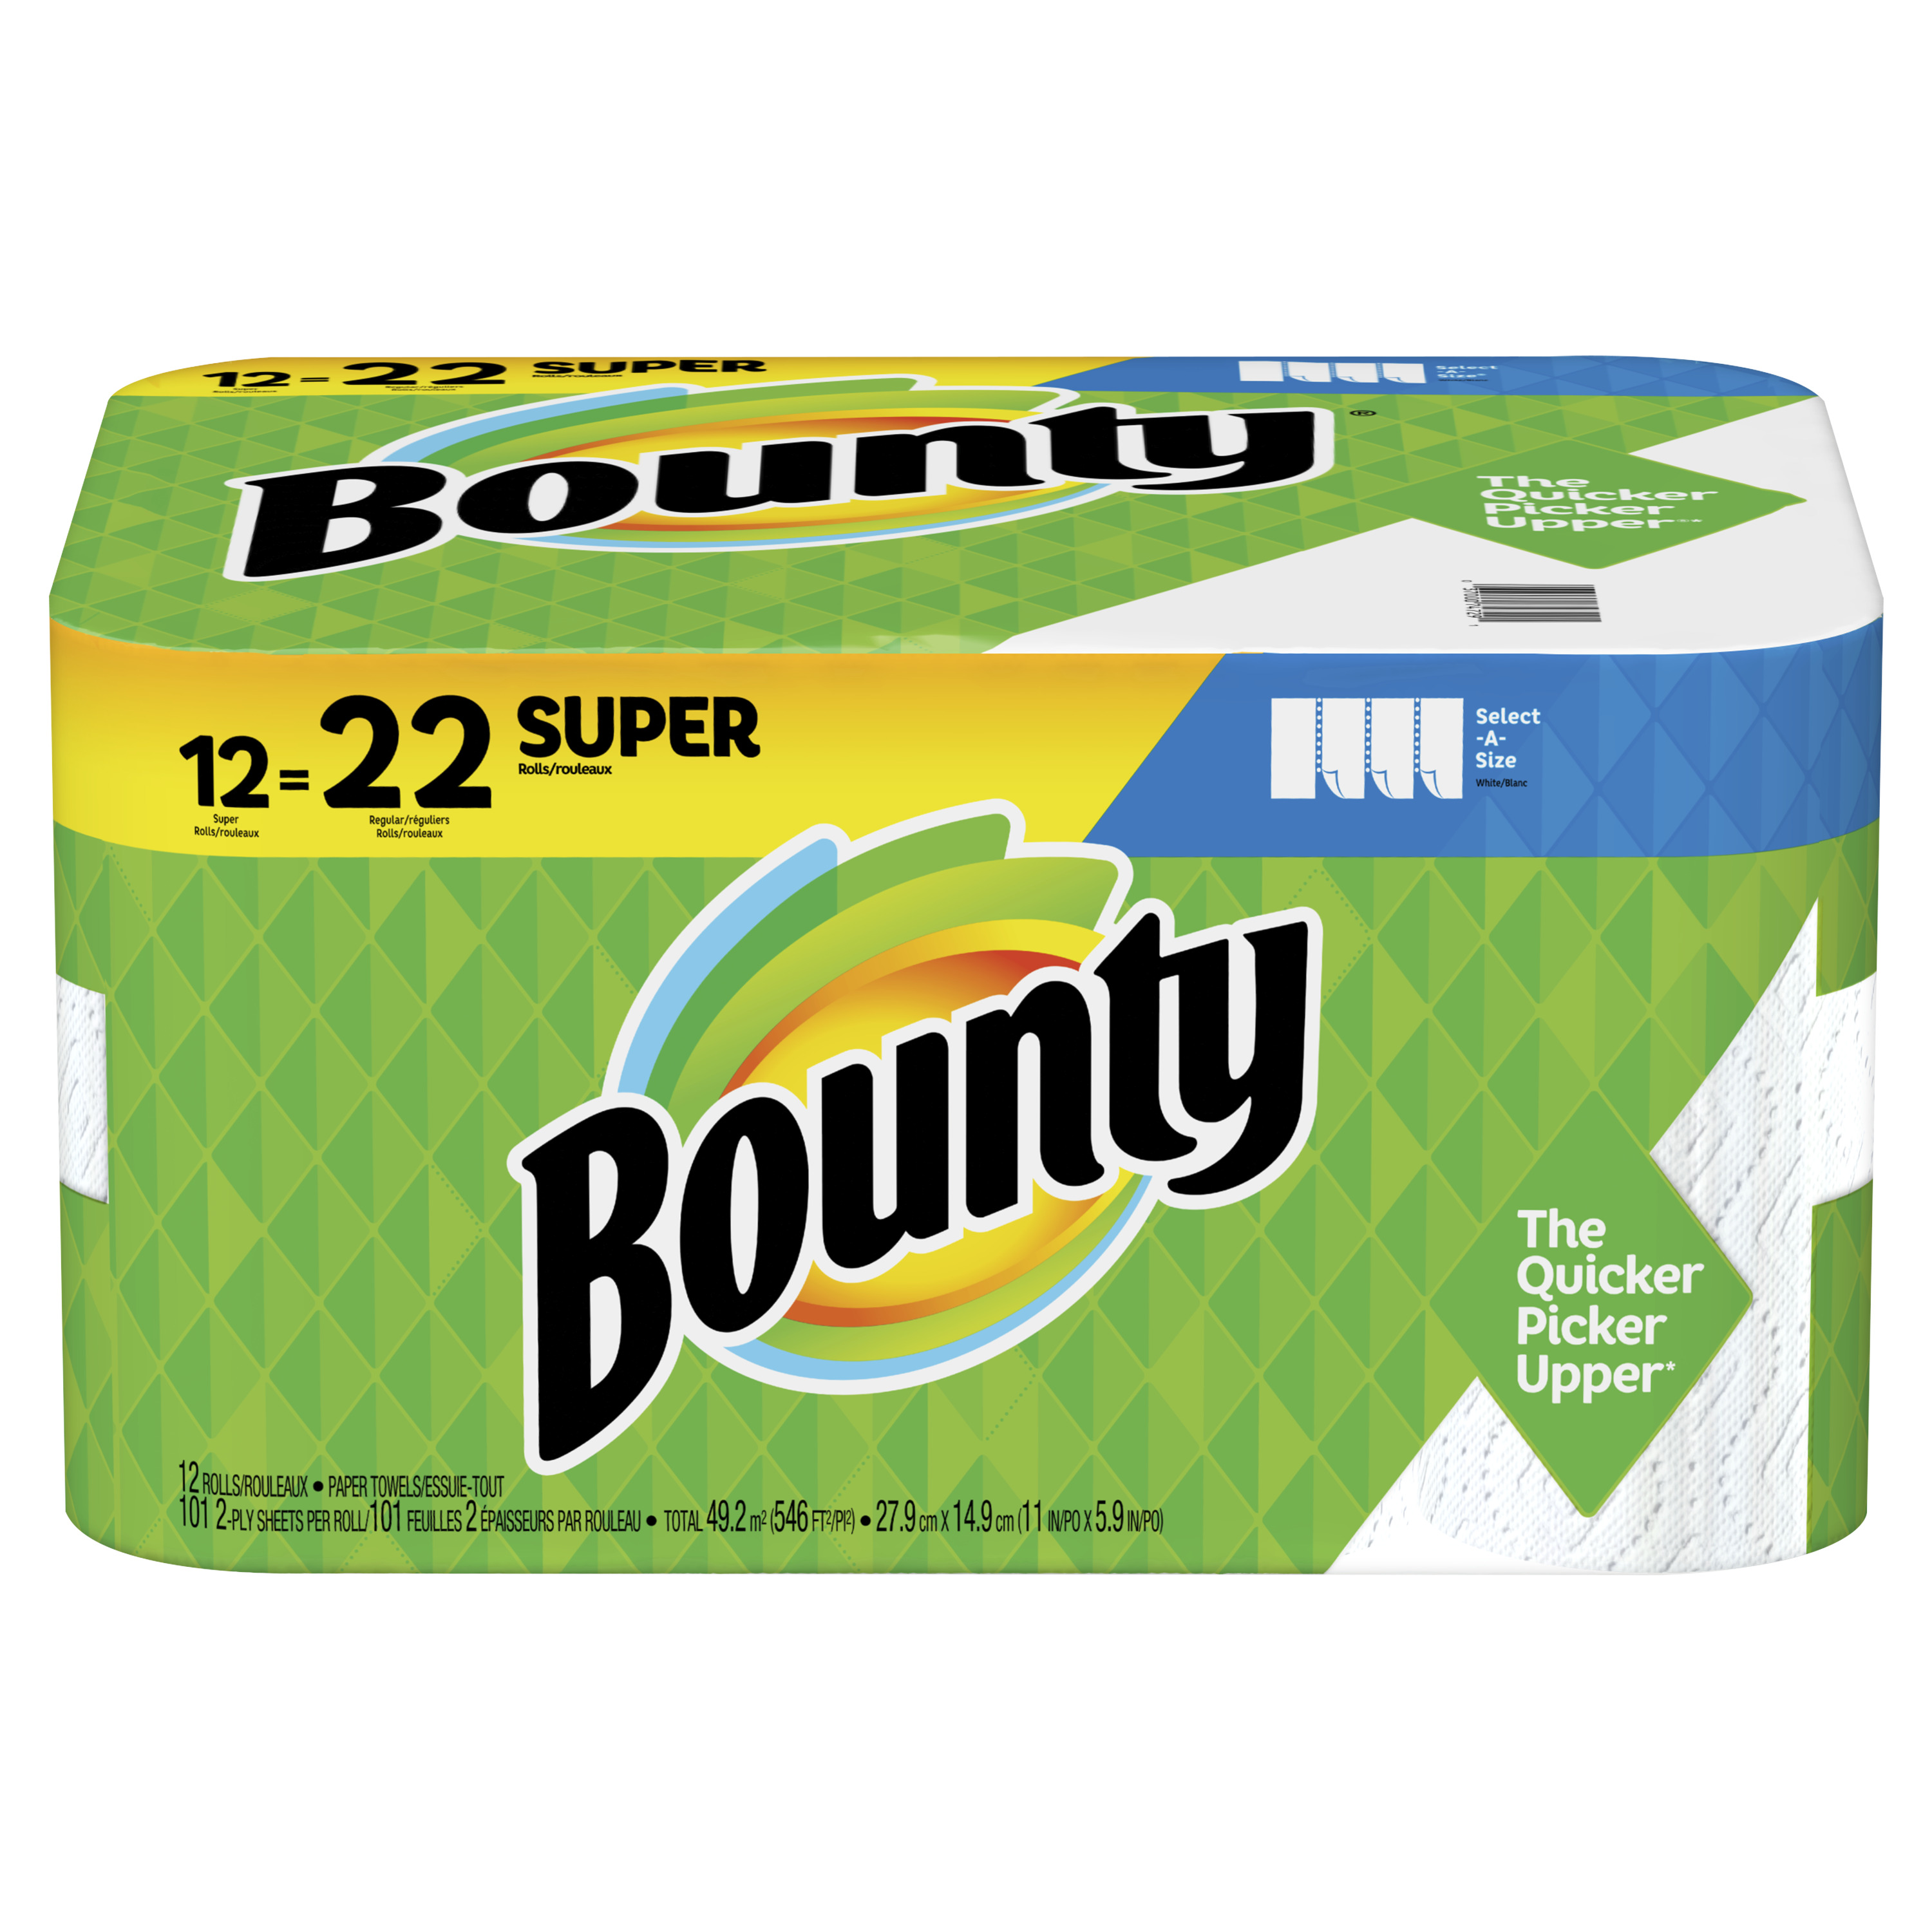 Bounty Select-A-Size Paper Towels, White, 12 Super Rolls - image 1 of 13